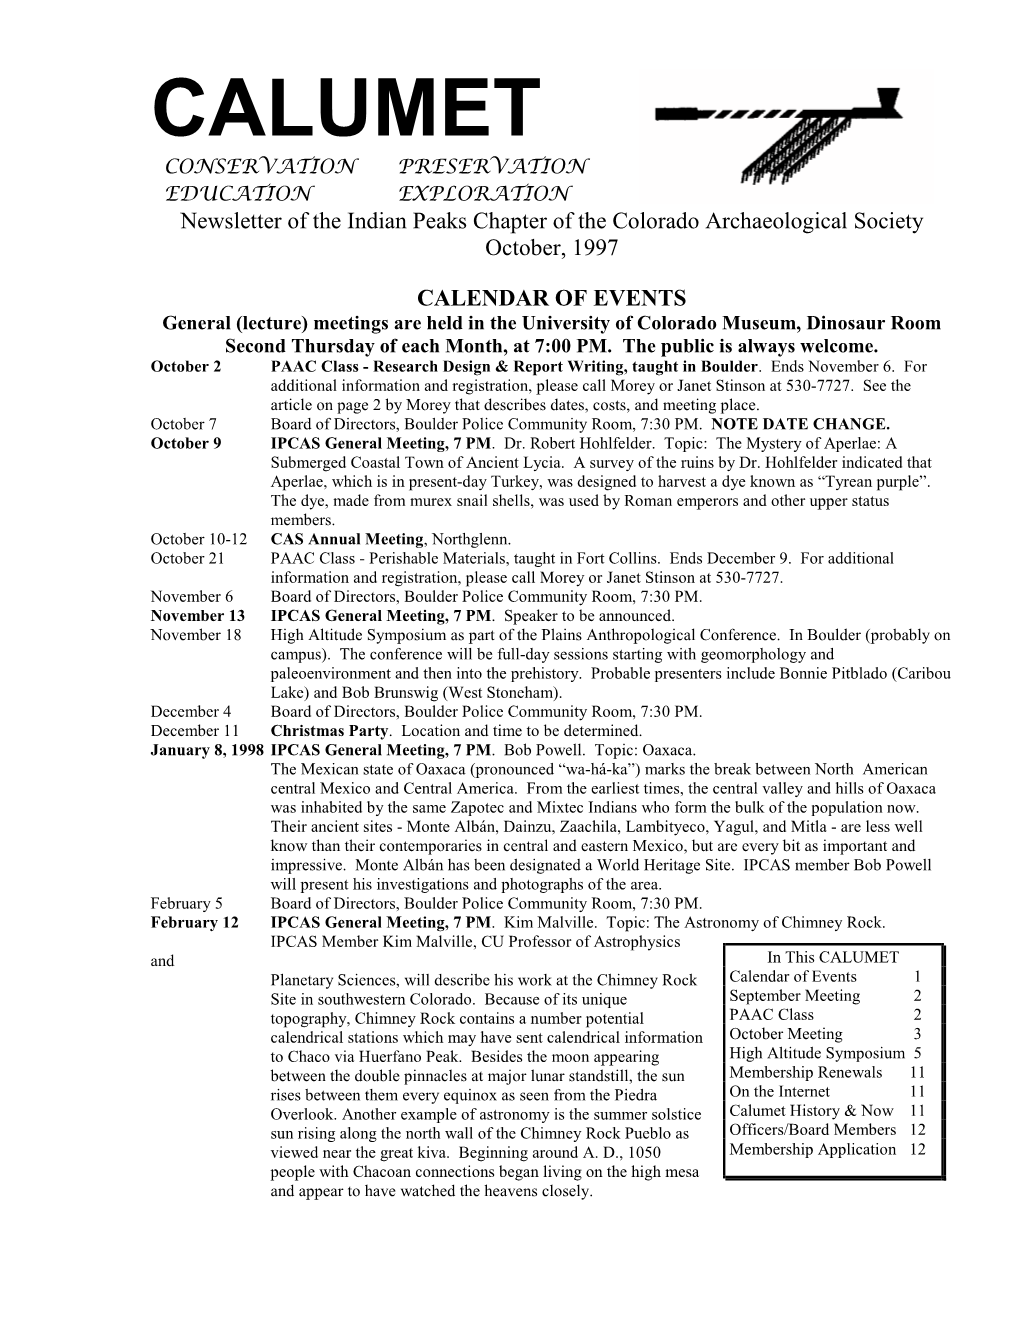 CALUMET CONSERVATION PRESERVATION EDUCATION EXPLORATION Newsletter of the Indian Peaks Chapter of the Colorado Archaeological Society October, 1997